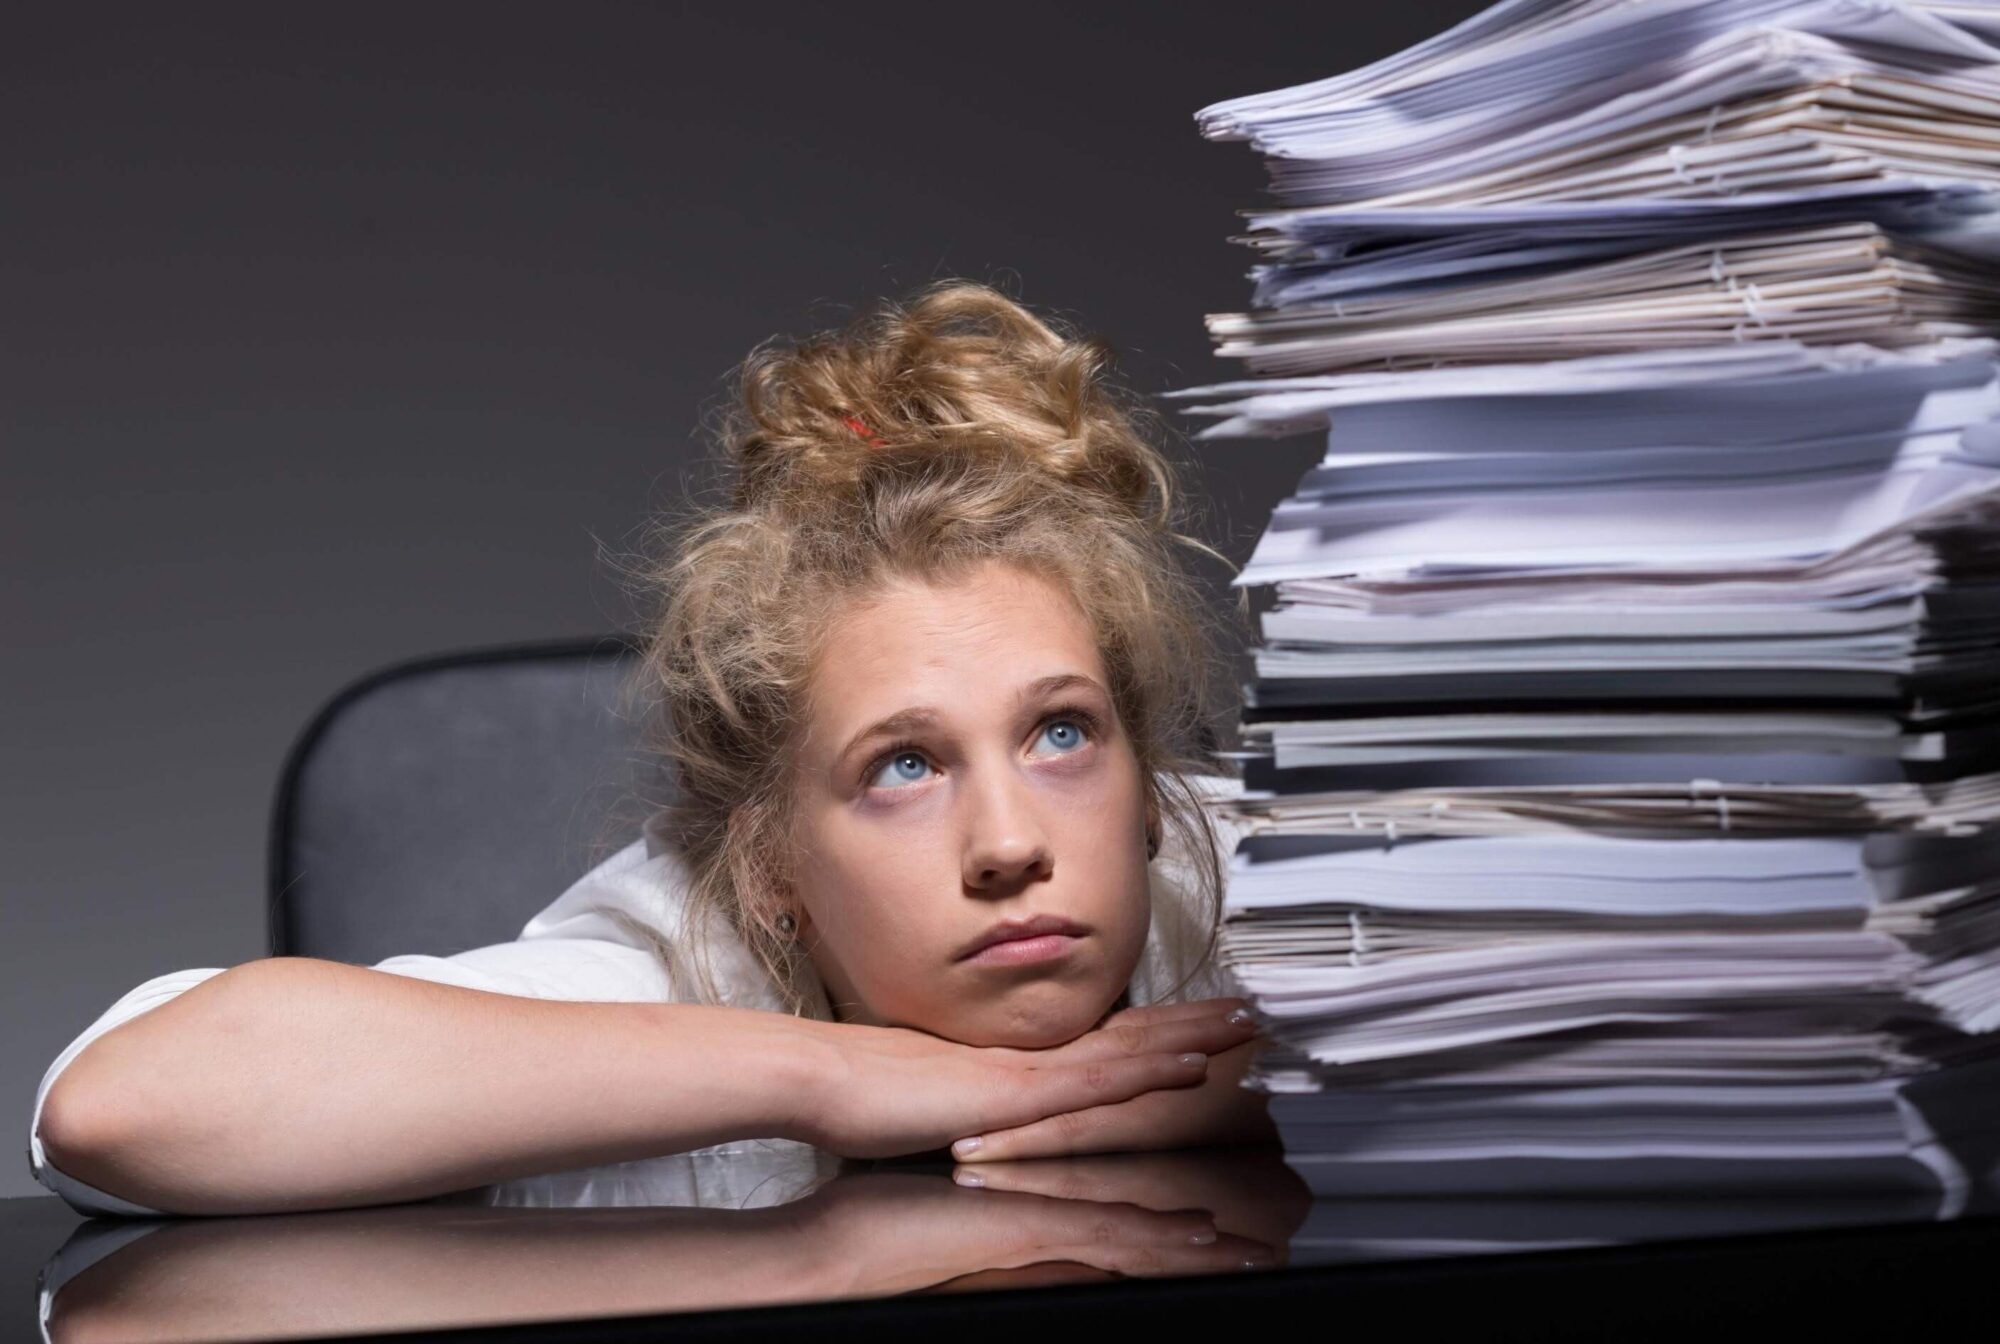 A teacher is overwhelmed staring at a huge pile of paperwork while considering quiet quitting.